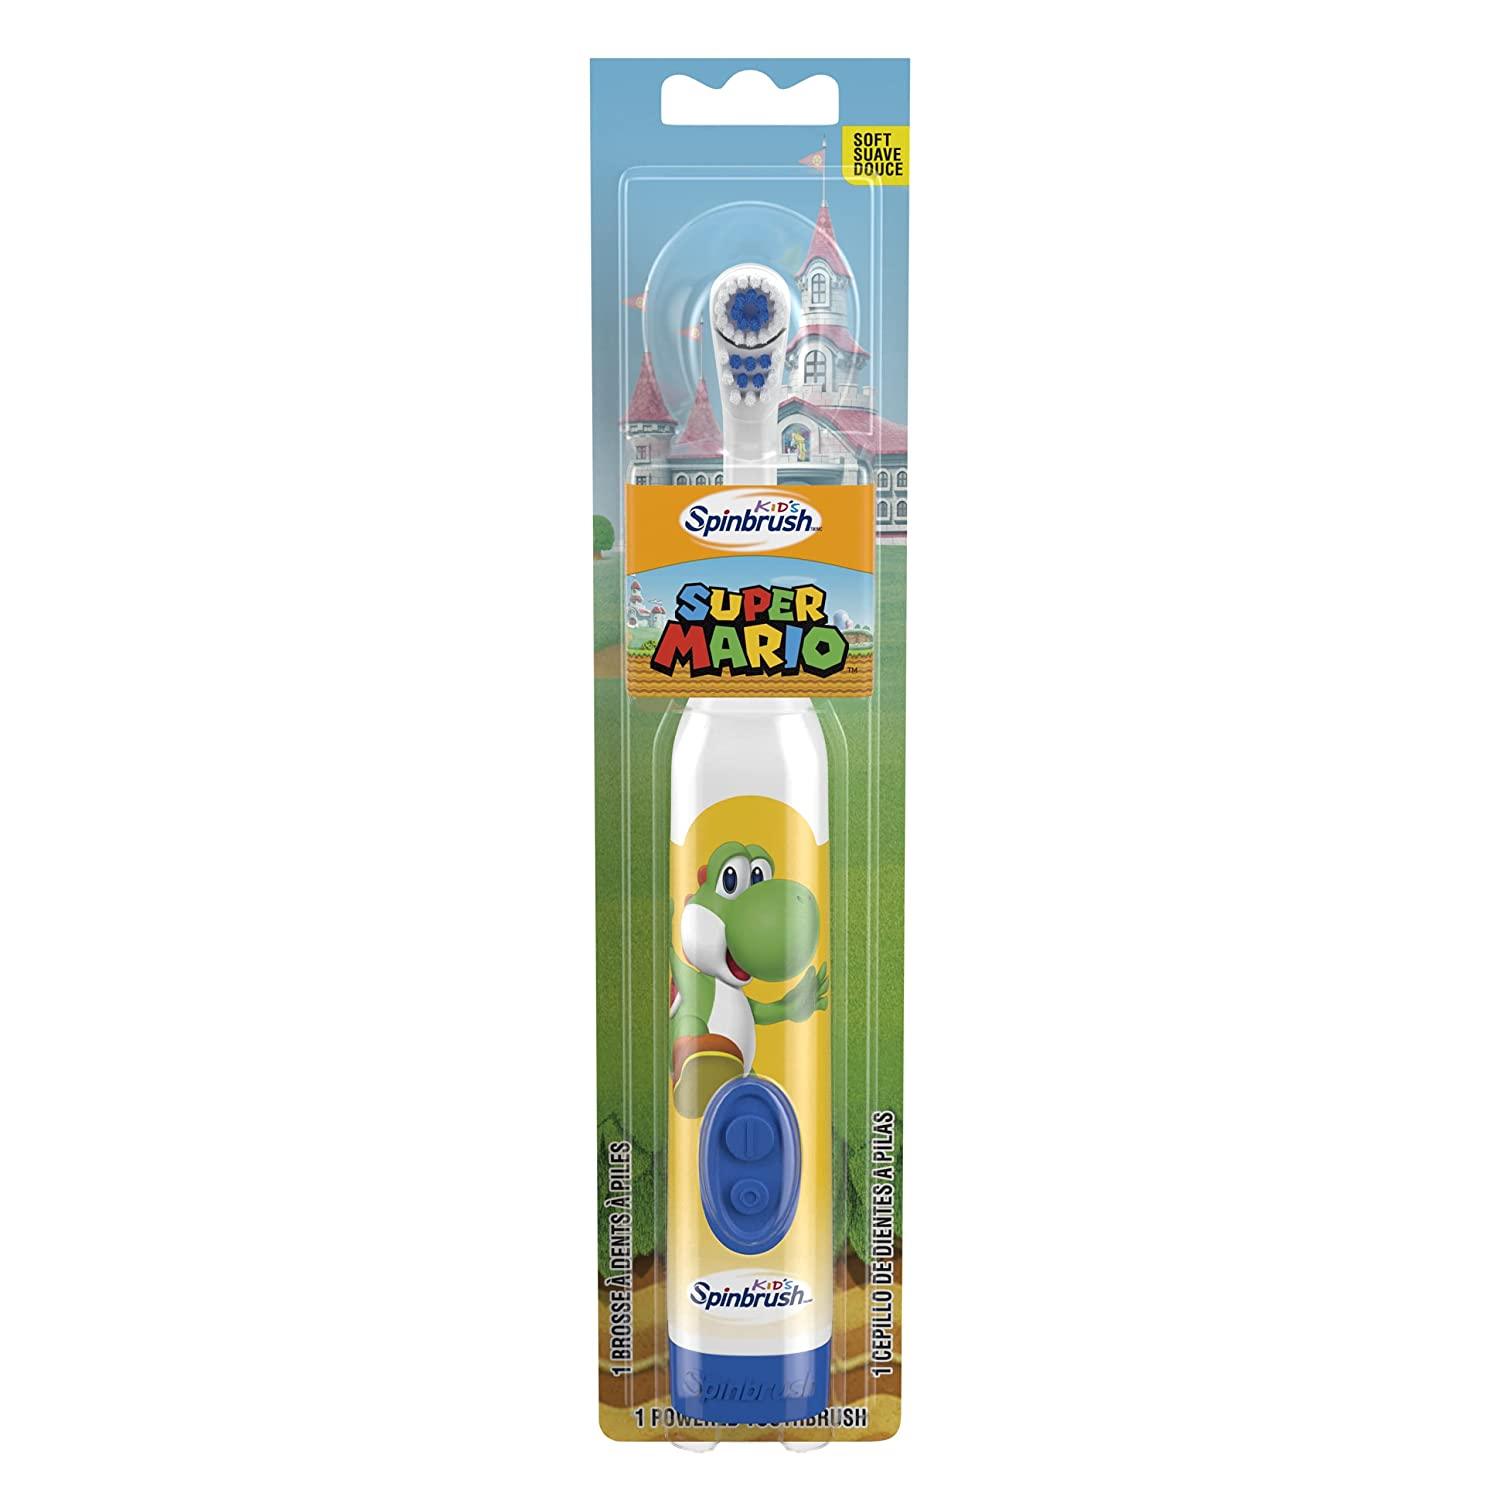 Super Mario Kid’s Spinbrush Electric Battery Toothbrush, Soft, 1 ct, Character May Vary - BumbleToys - 5-7 Years, 8-13 Years, Baby Saftey & Health, Boys, Super Mario, Toothbrush